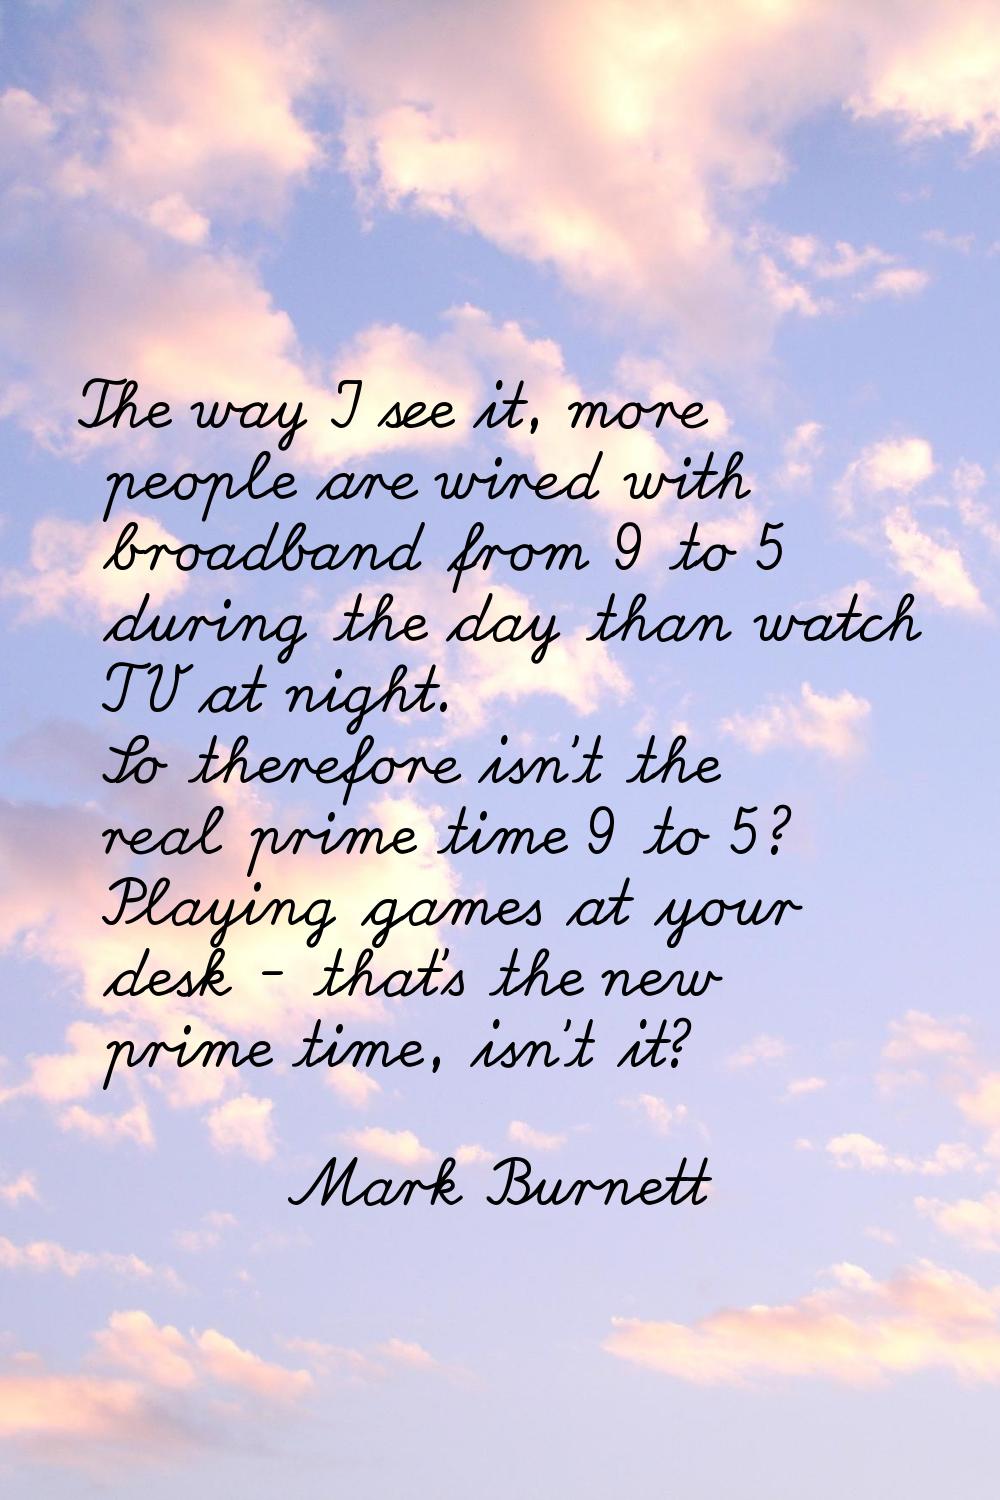 The way I see it, more people are wired with broadband from 9 to 5 during the day than watch TV at 